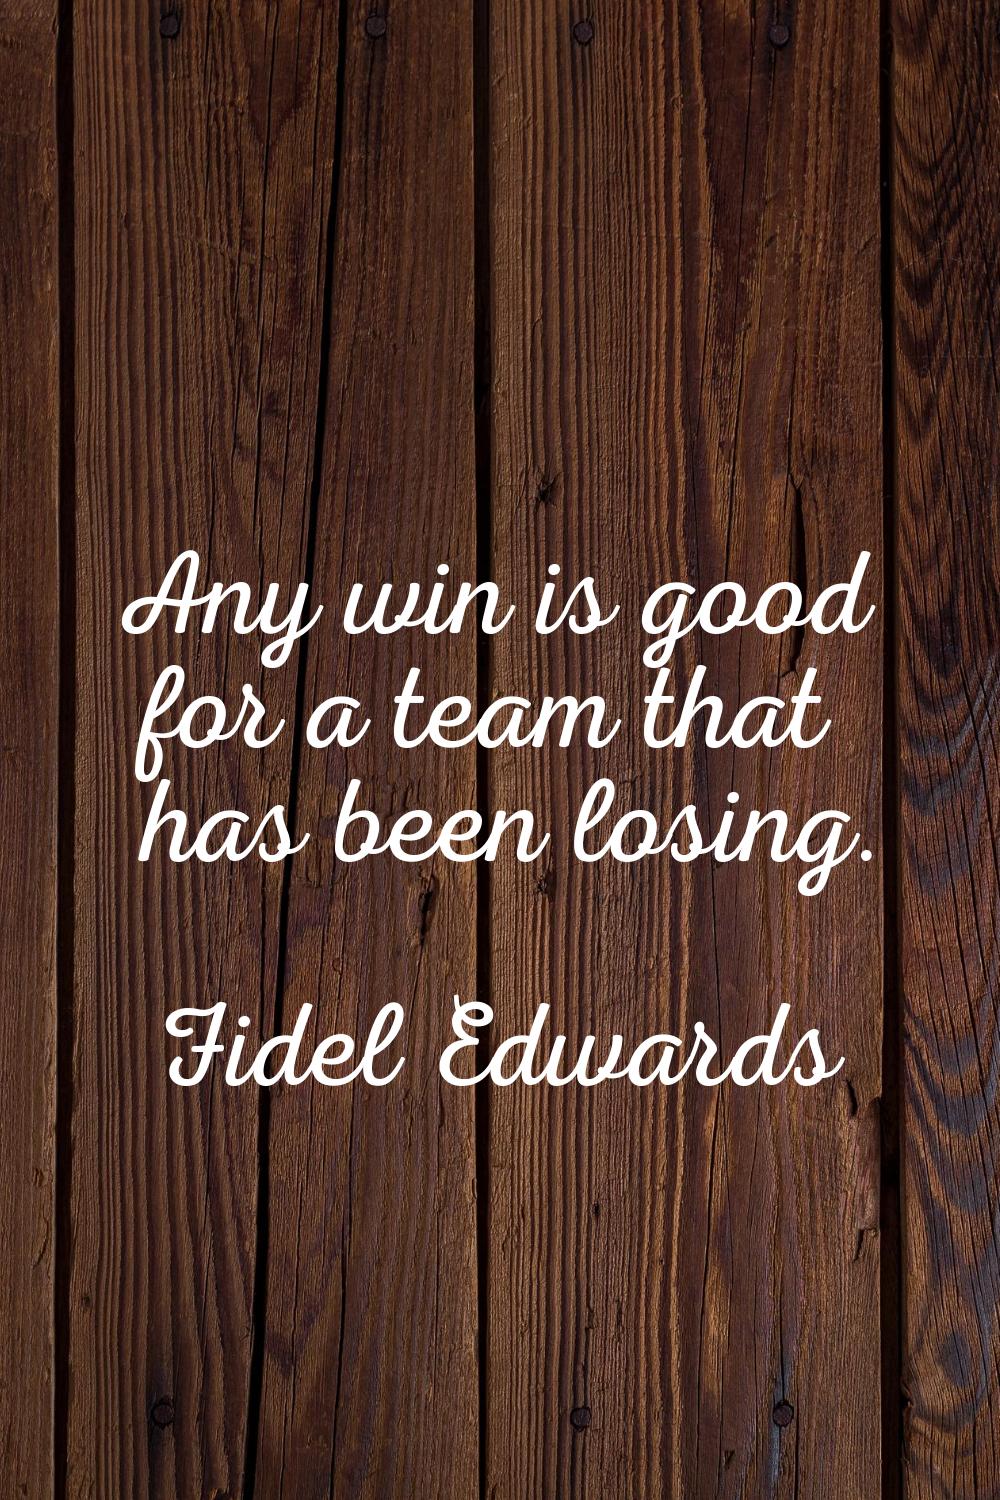 Any win is good for a team that has been losing.